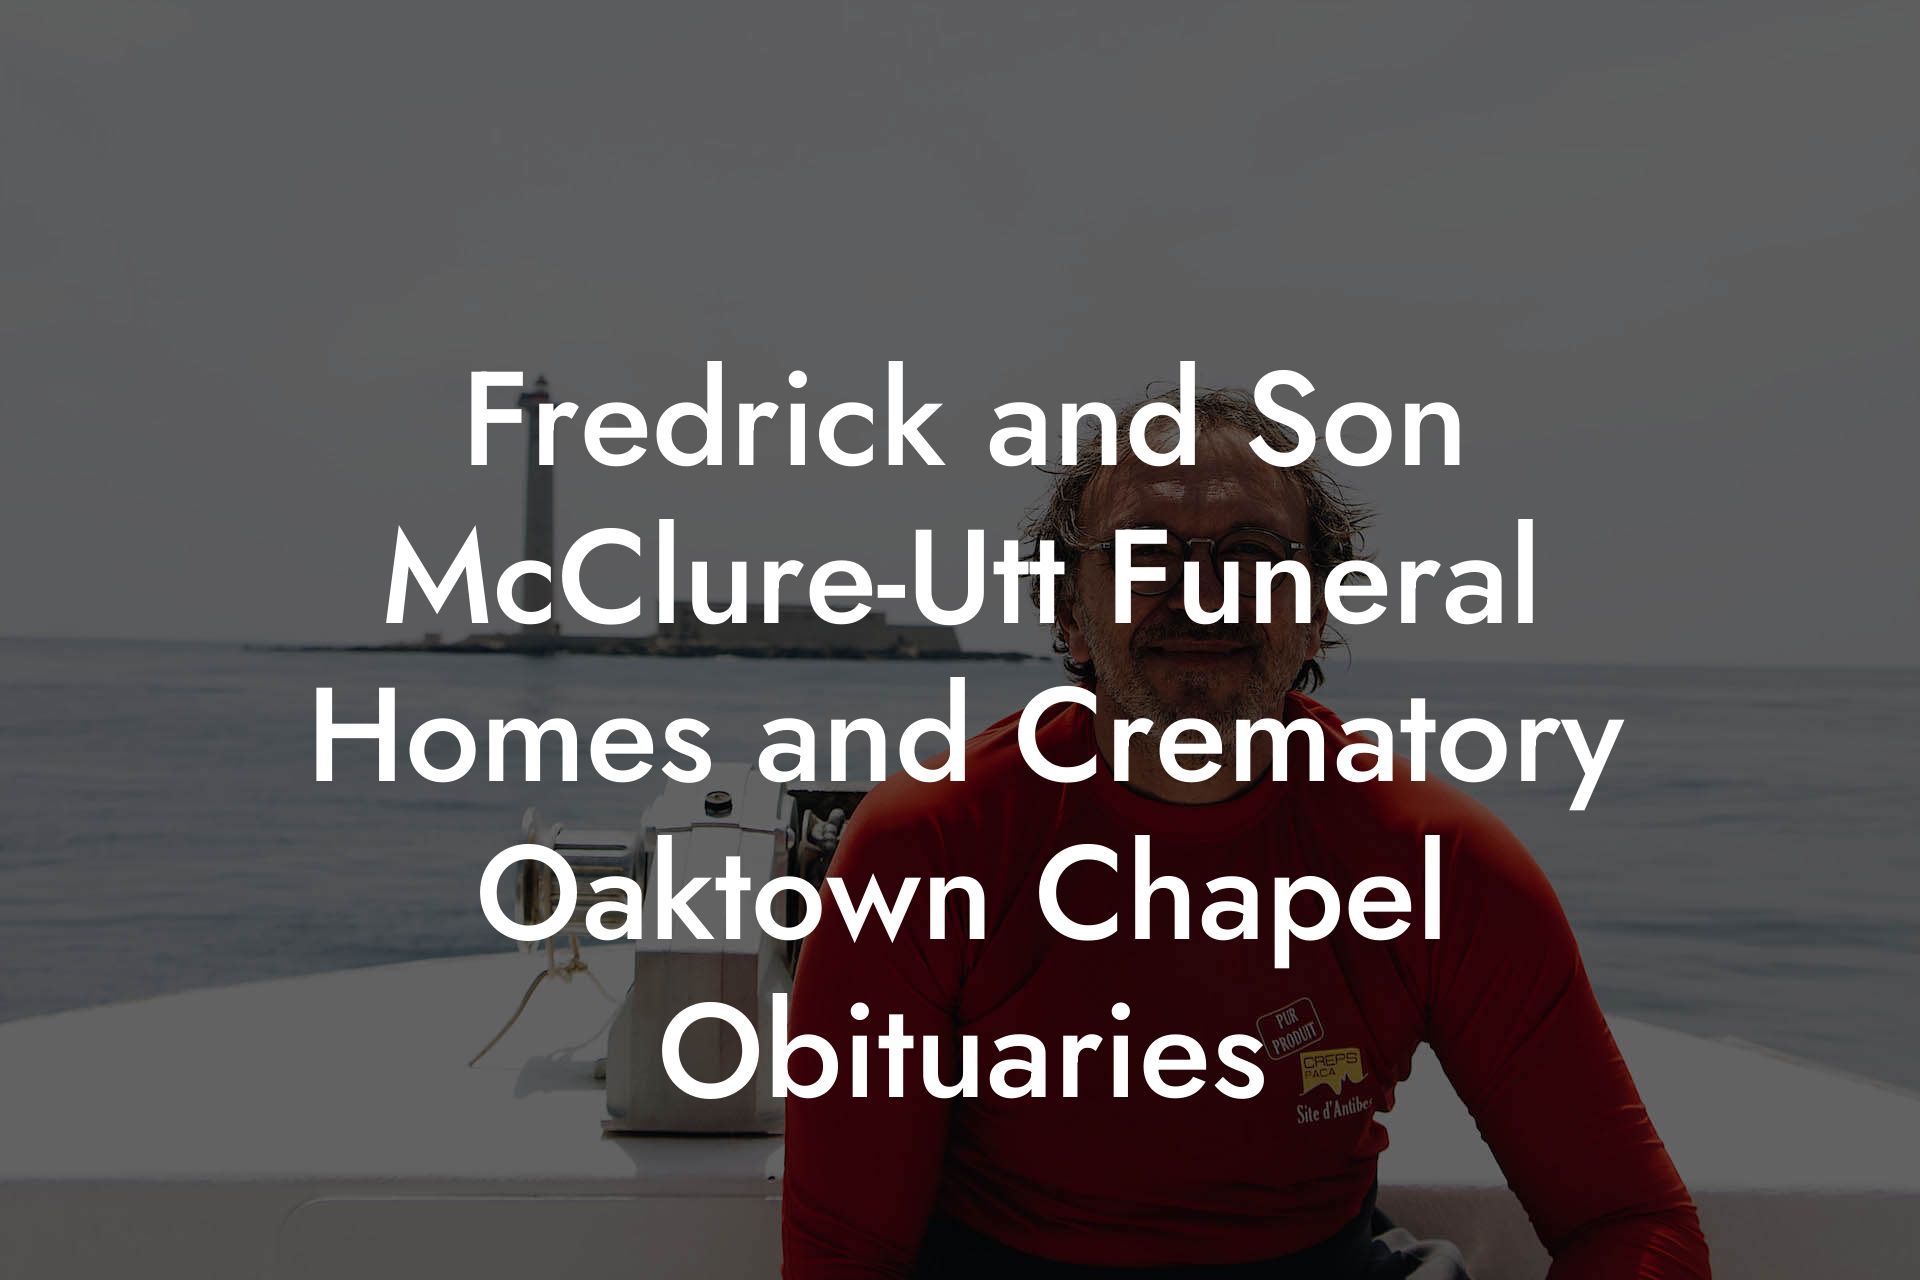 Fredrick and Son McClure-Utt Funeral Homes and Crematory Oaktown Chapel Obituaries